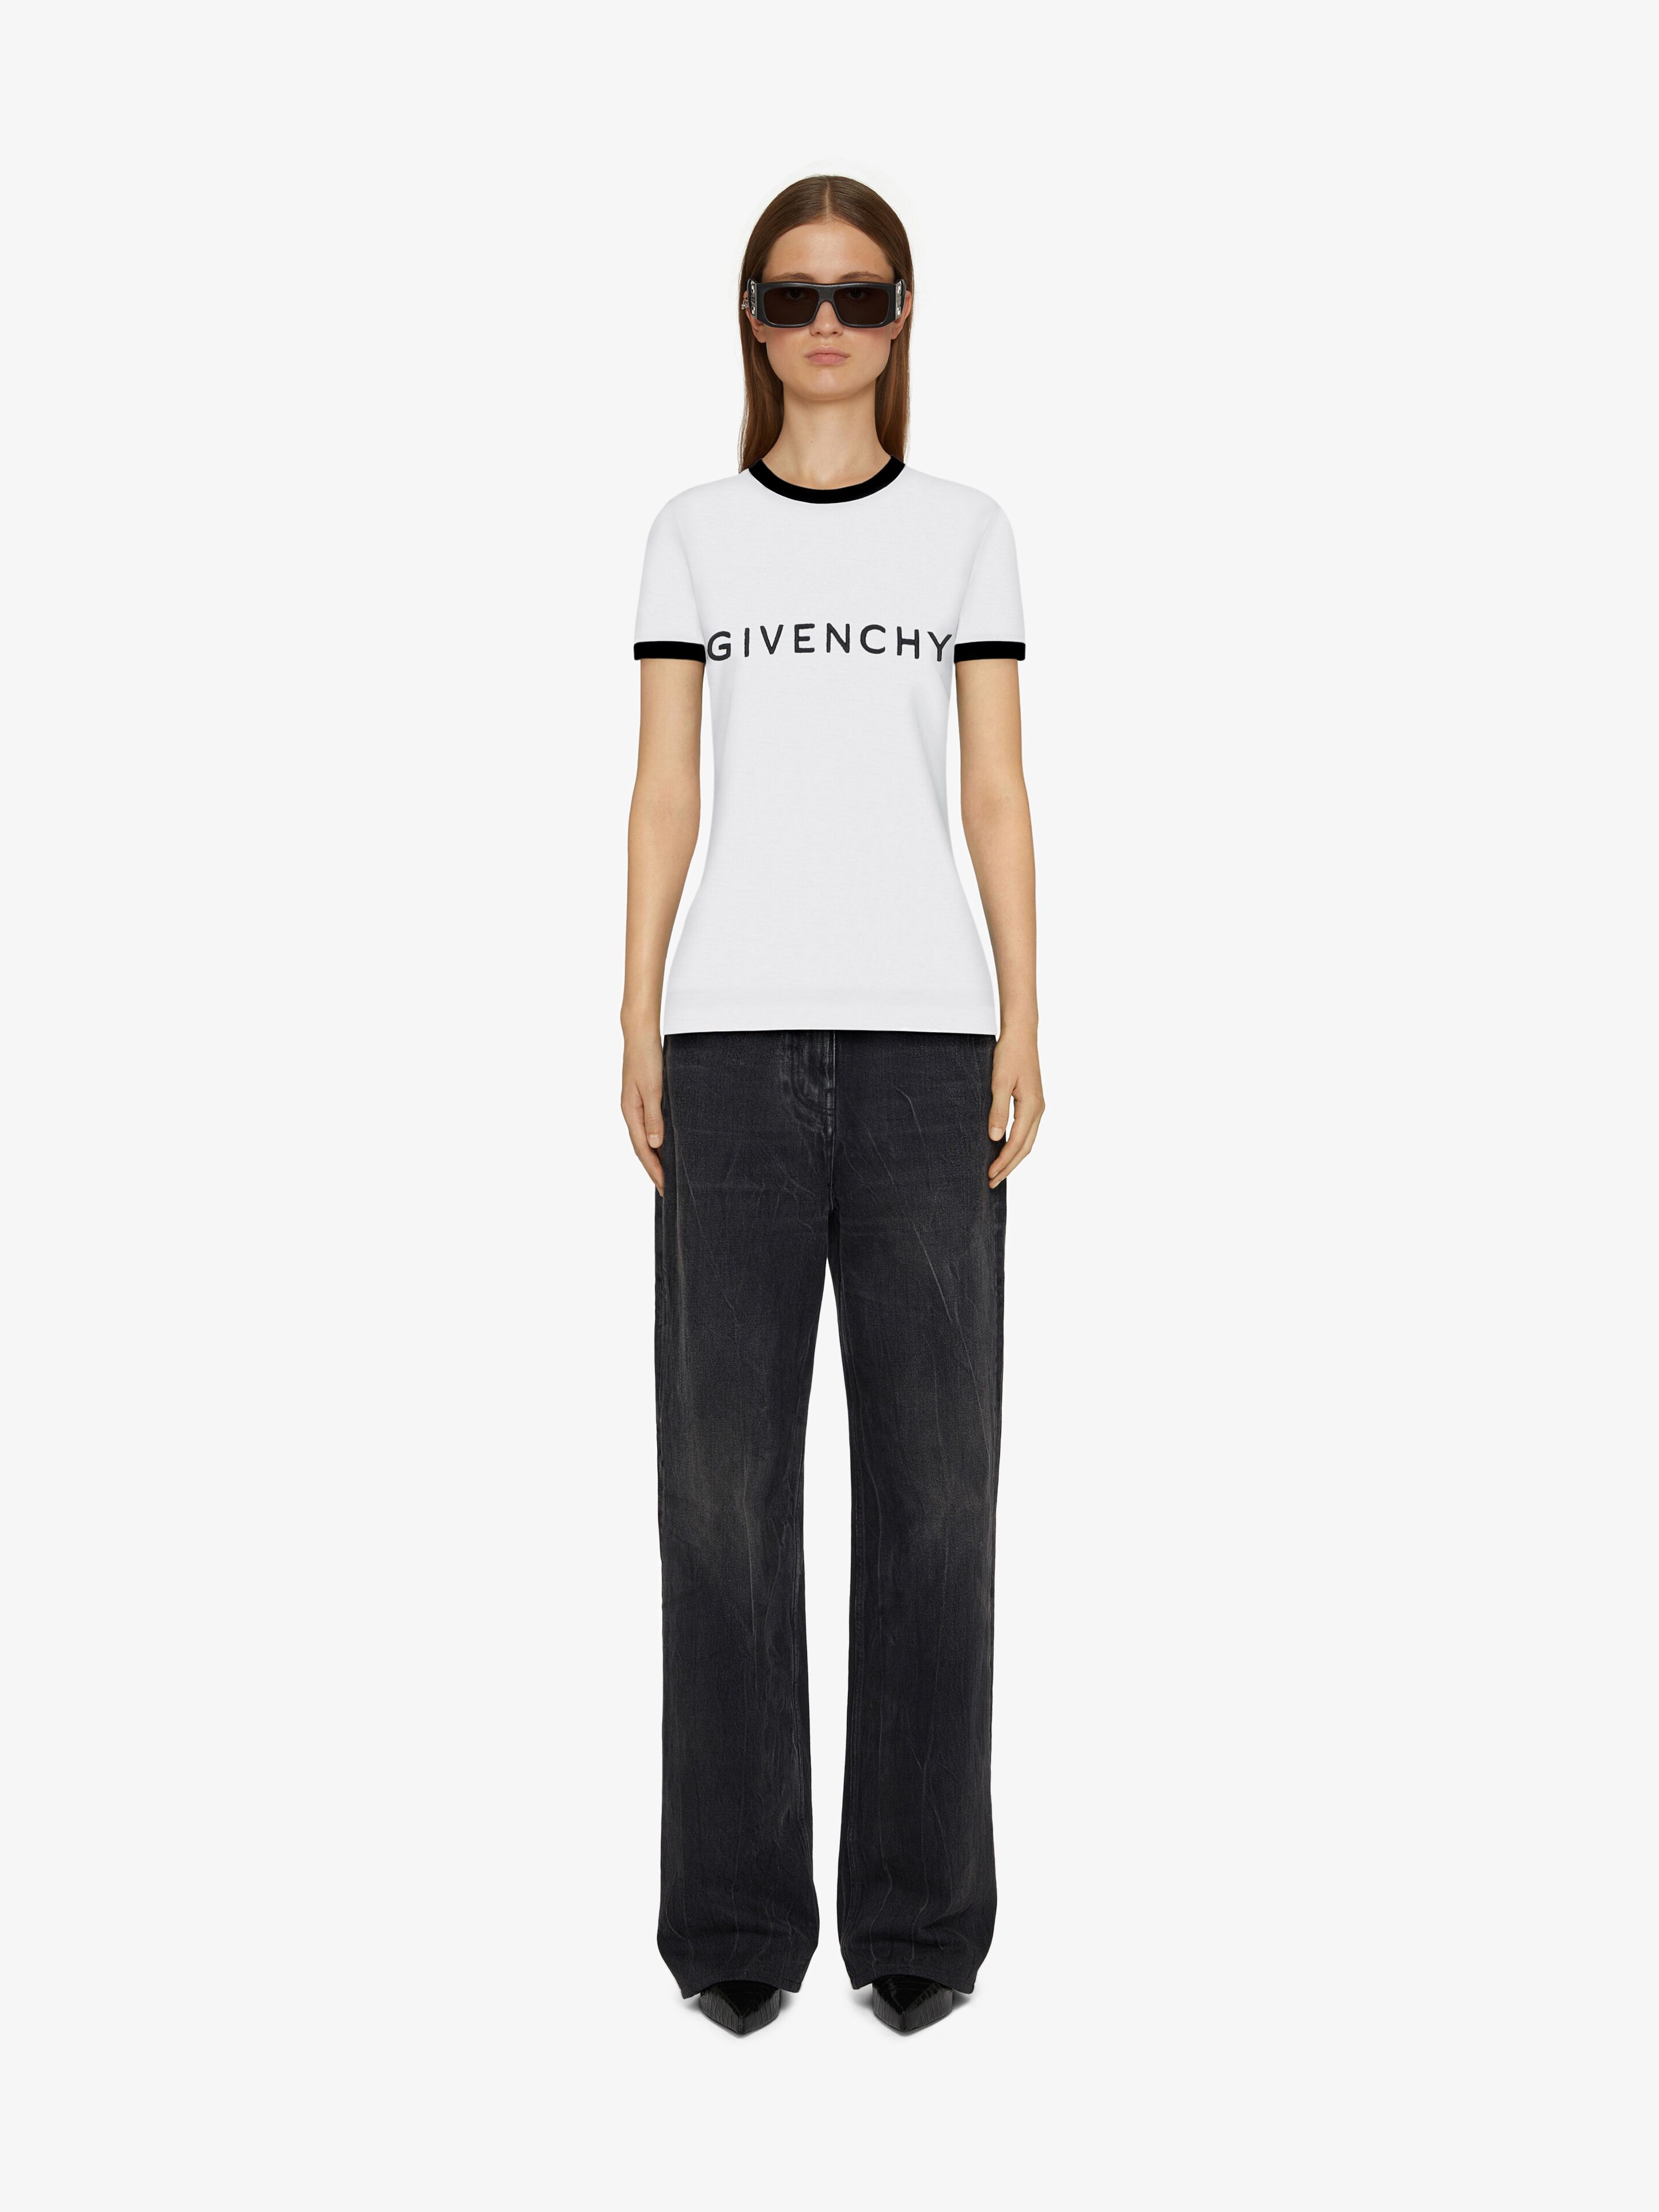 GIVENCHY SLIM FIT T-SHIRT IN COTTON - 2